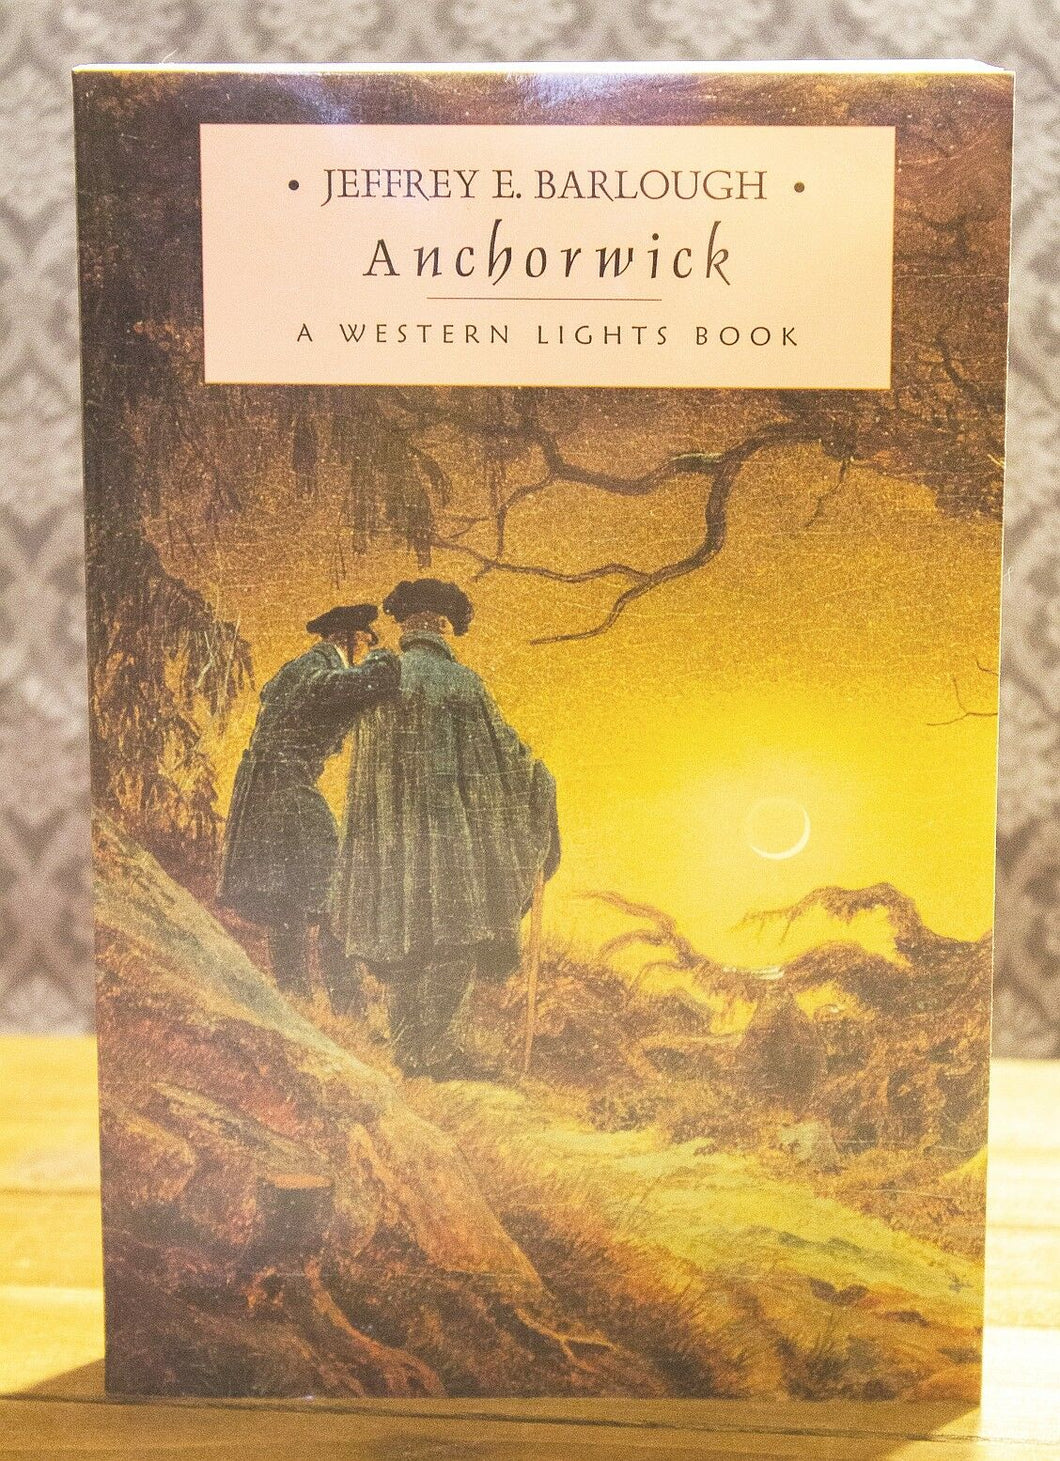 Anchorwick The Western Lights Series Book 5 by Jeffrey E Barlough Paperback NEW